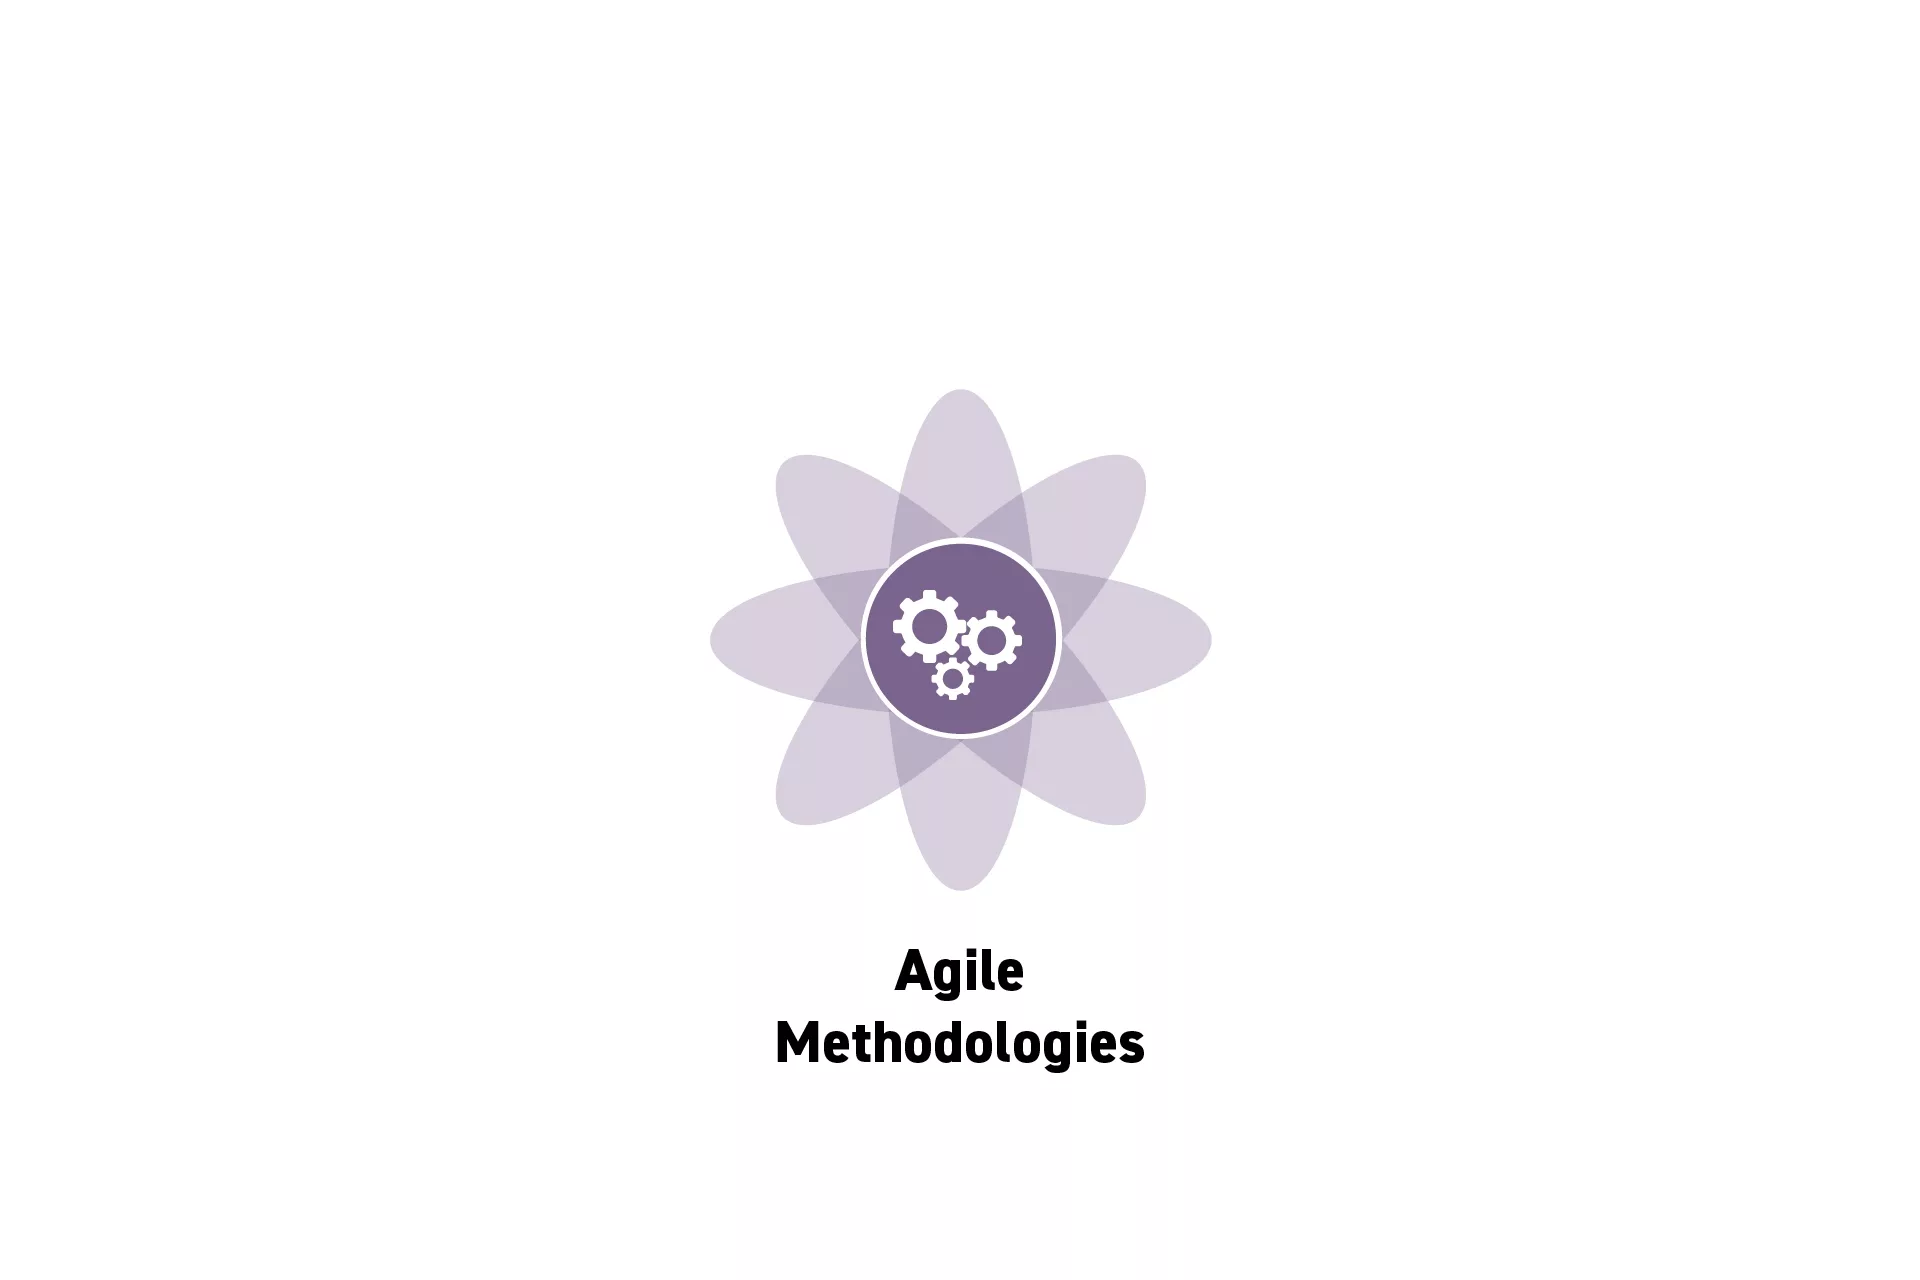 <p>A flower that represents Project Management with the text “Agile Methodologies” beneath it.</p>